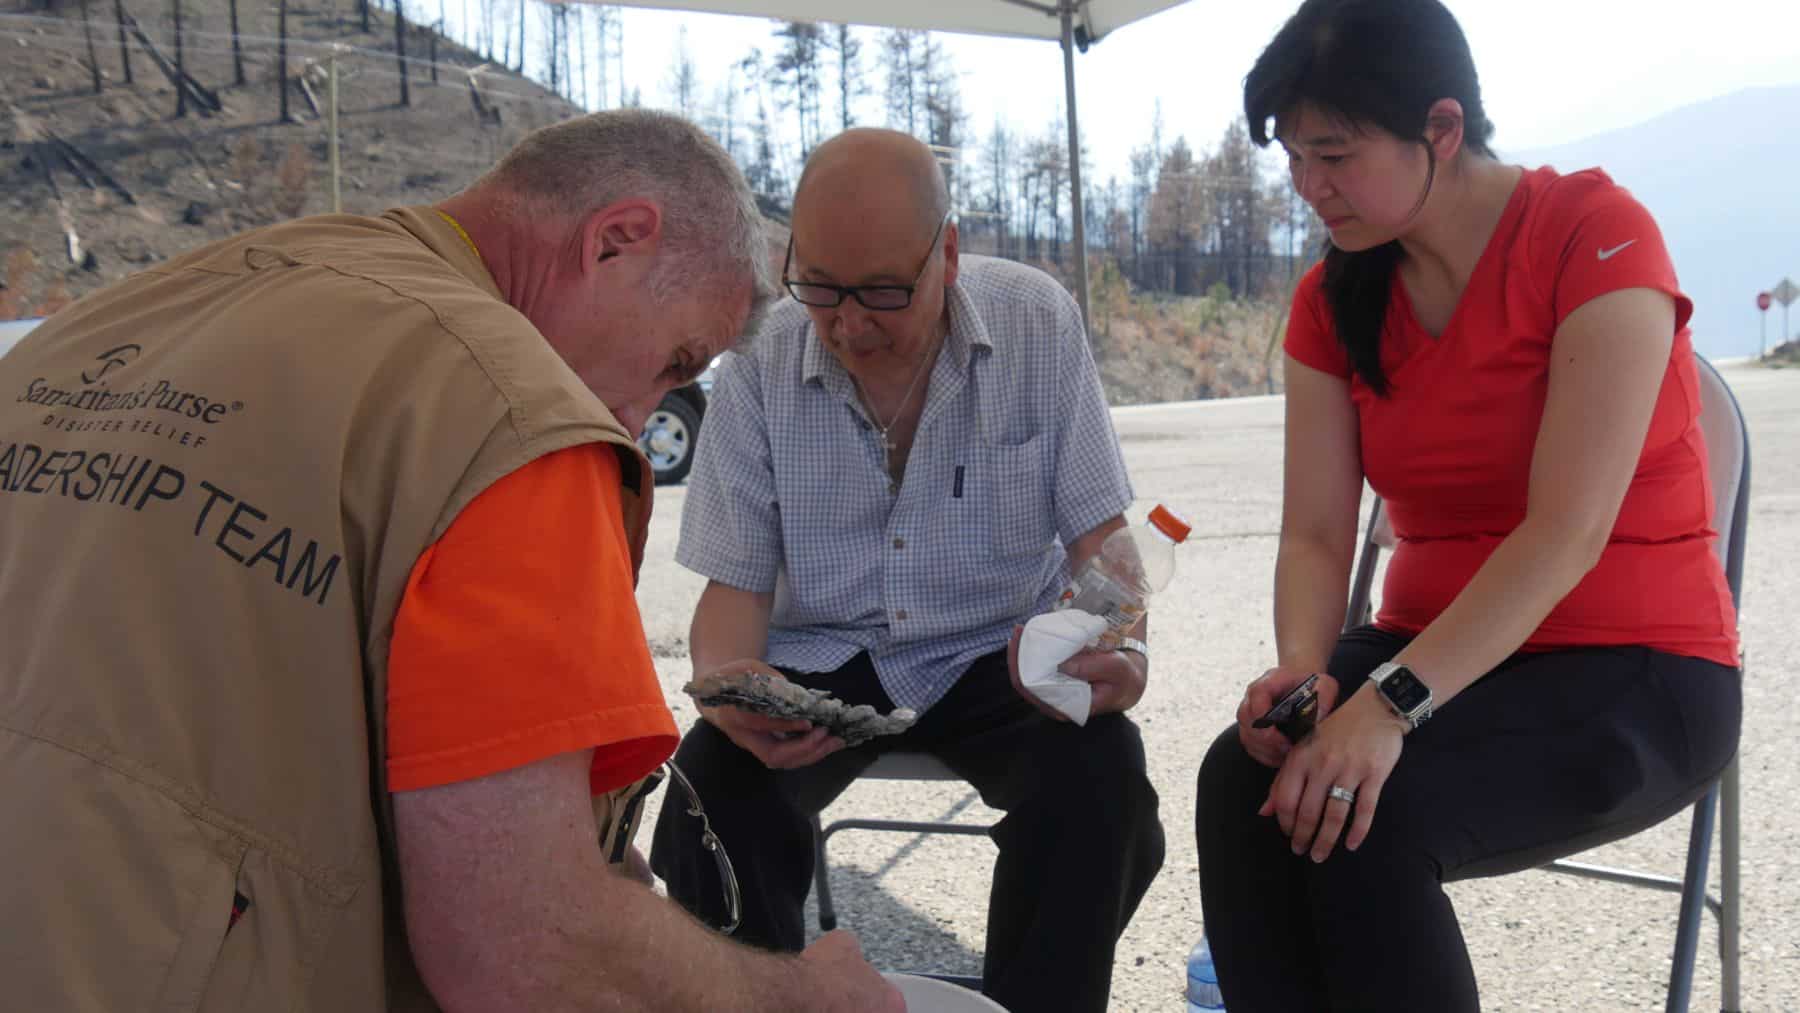 Kenny and his daughter, Margaret, meet with a Samaritan’s Purse site leadership team member to look at some of the items recovered from the ashes.